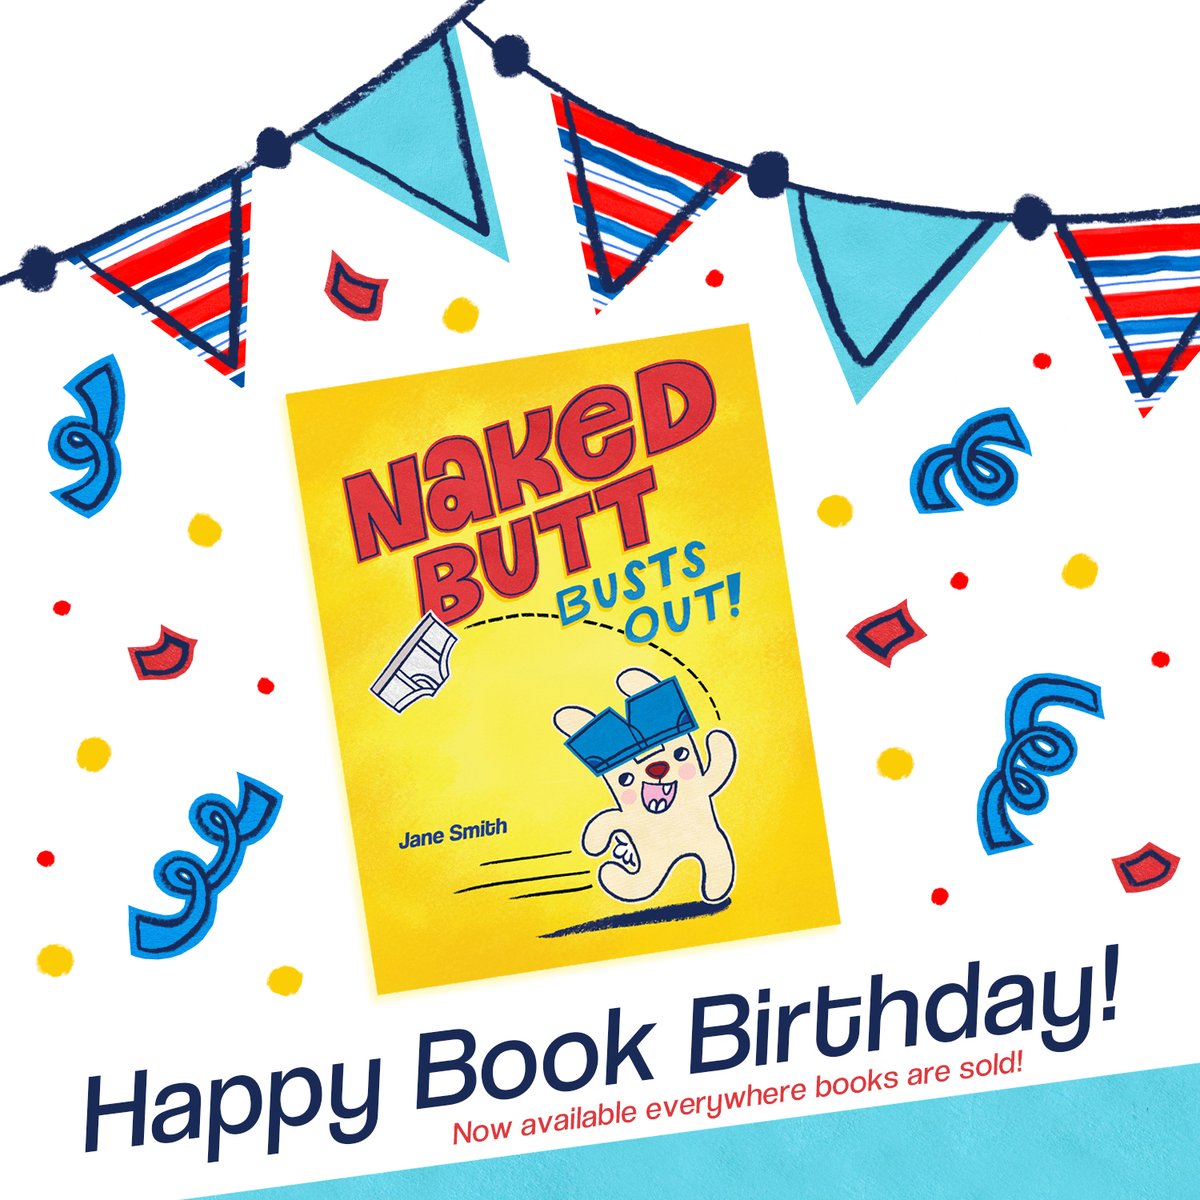 #HappyBookBirthday 2 the hilarious, new #picturebook, Naked Butt Busts Out!! 🥳📚 Now available everywhere books R sold! 😂🐰🎉Join me in celebrating this SAT 3/25 at the Naked Butt #VirtualBookRelease Party—#readaloud & #kidscraft—sign-up link in bio. #booktwitter #childrensbook